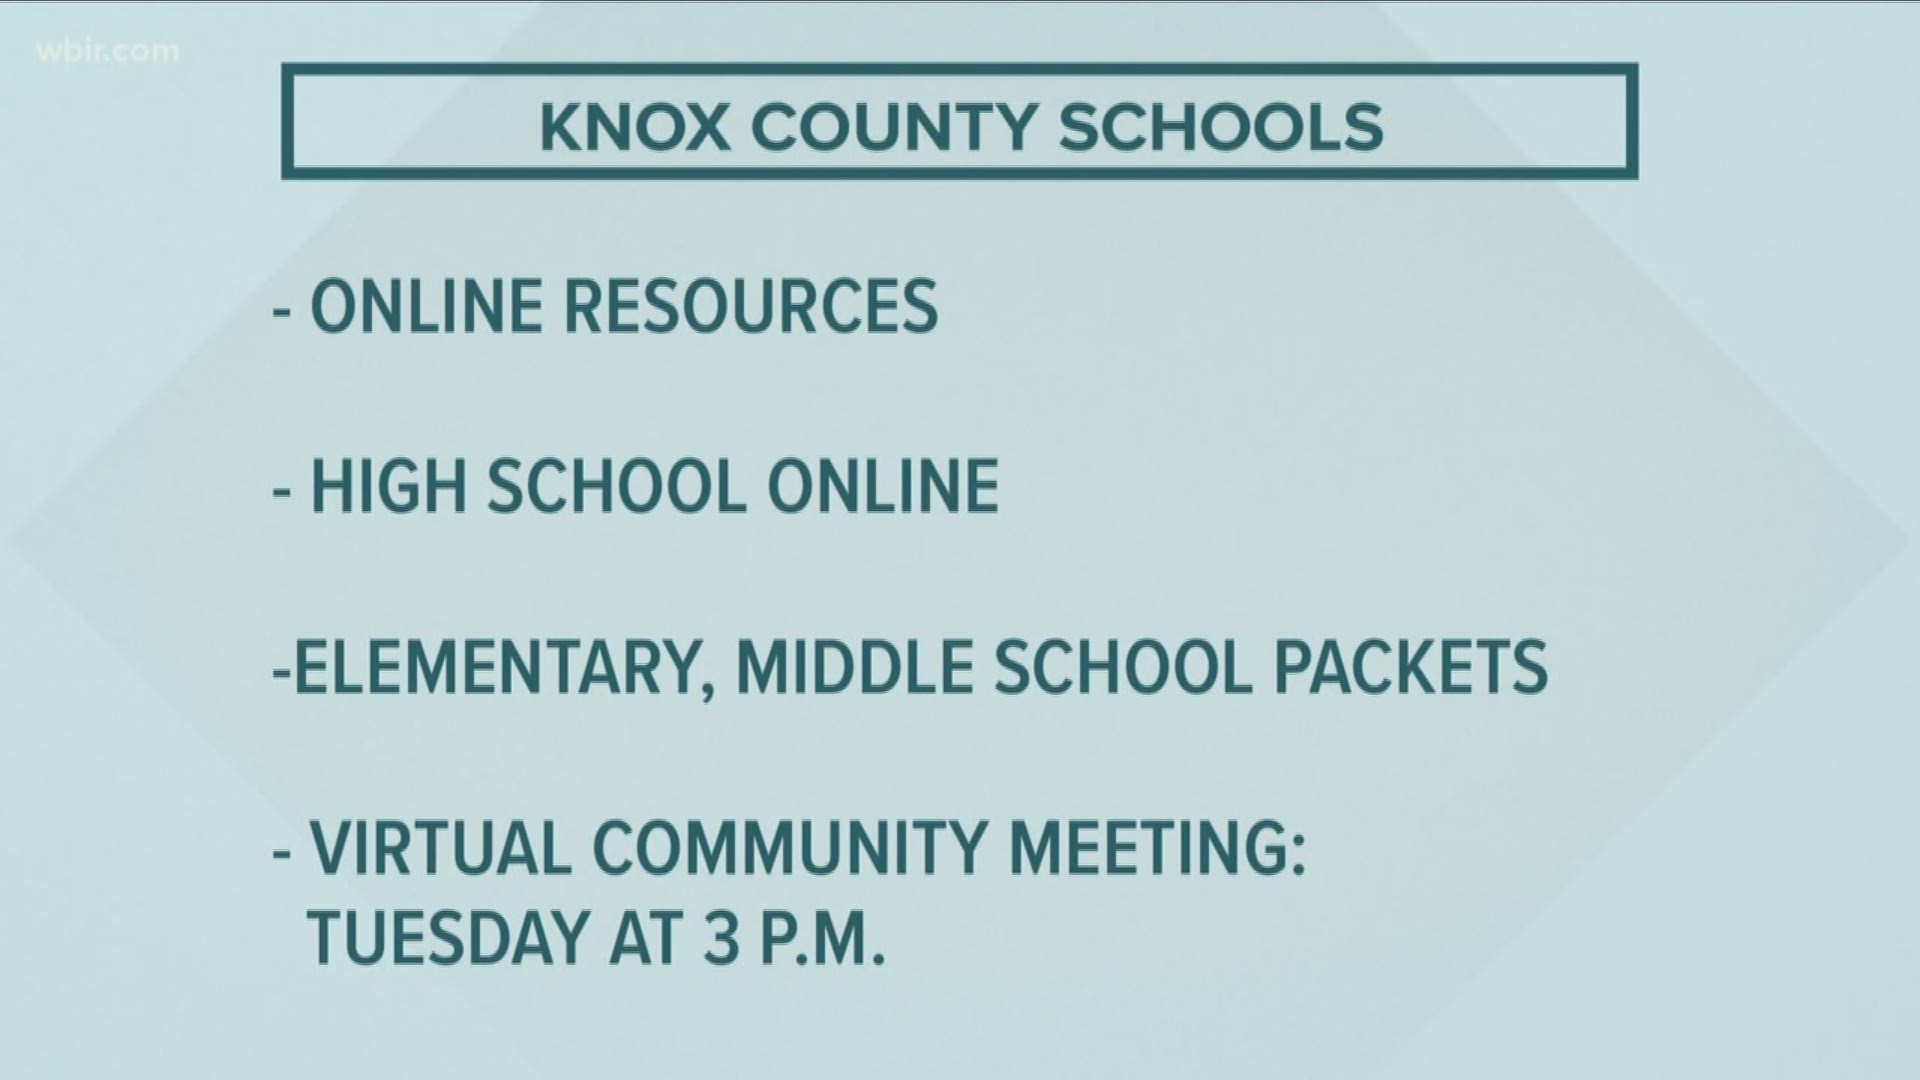 Today, students at Knox Schools will begin learning at-home, since schools are closed due to COVID-19.